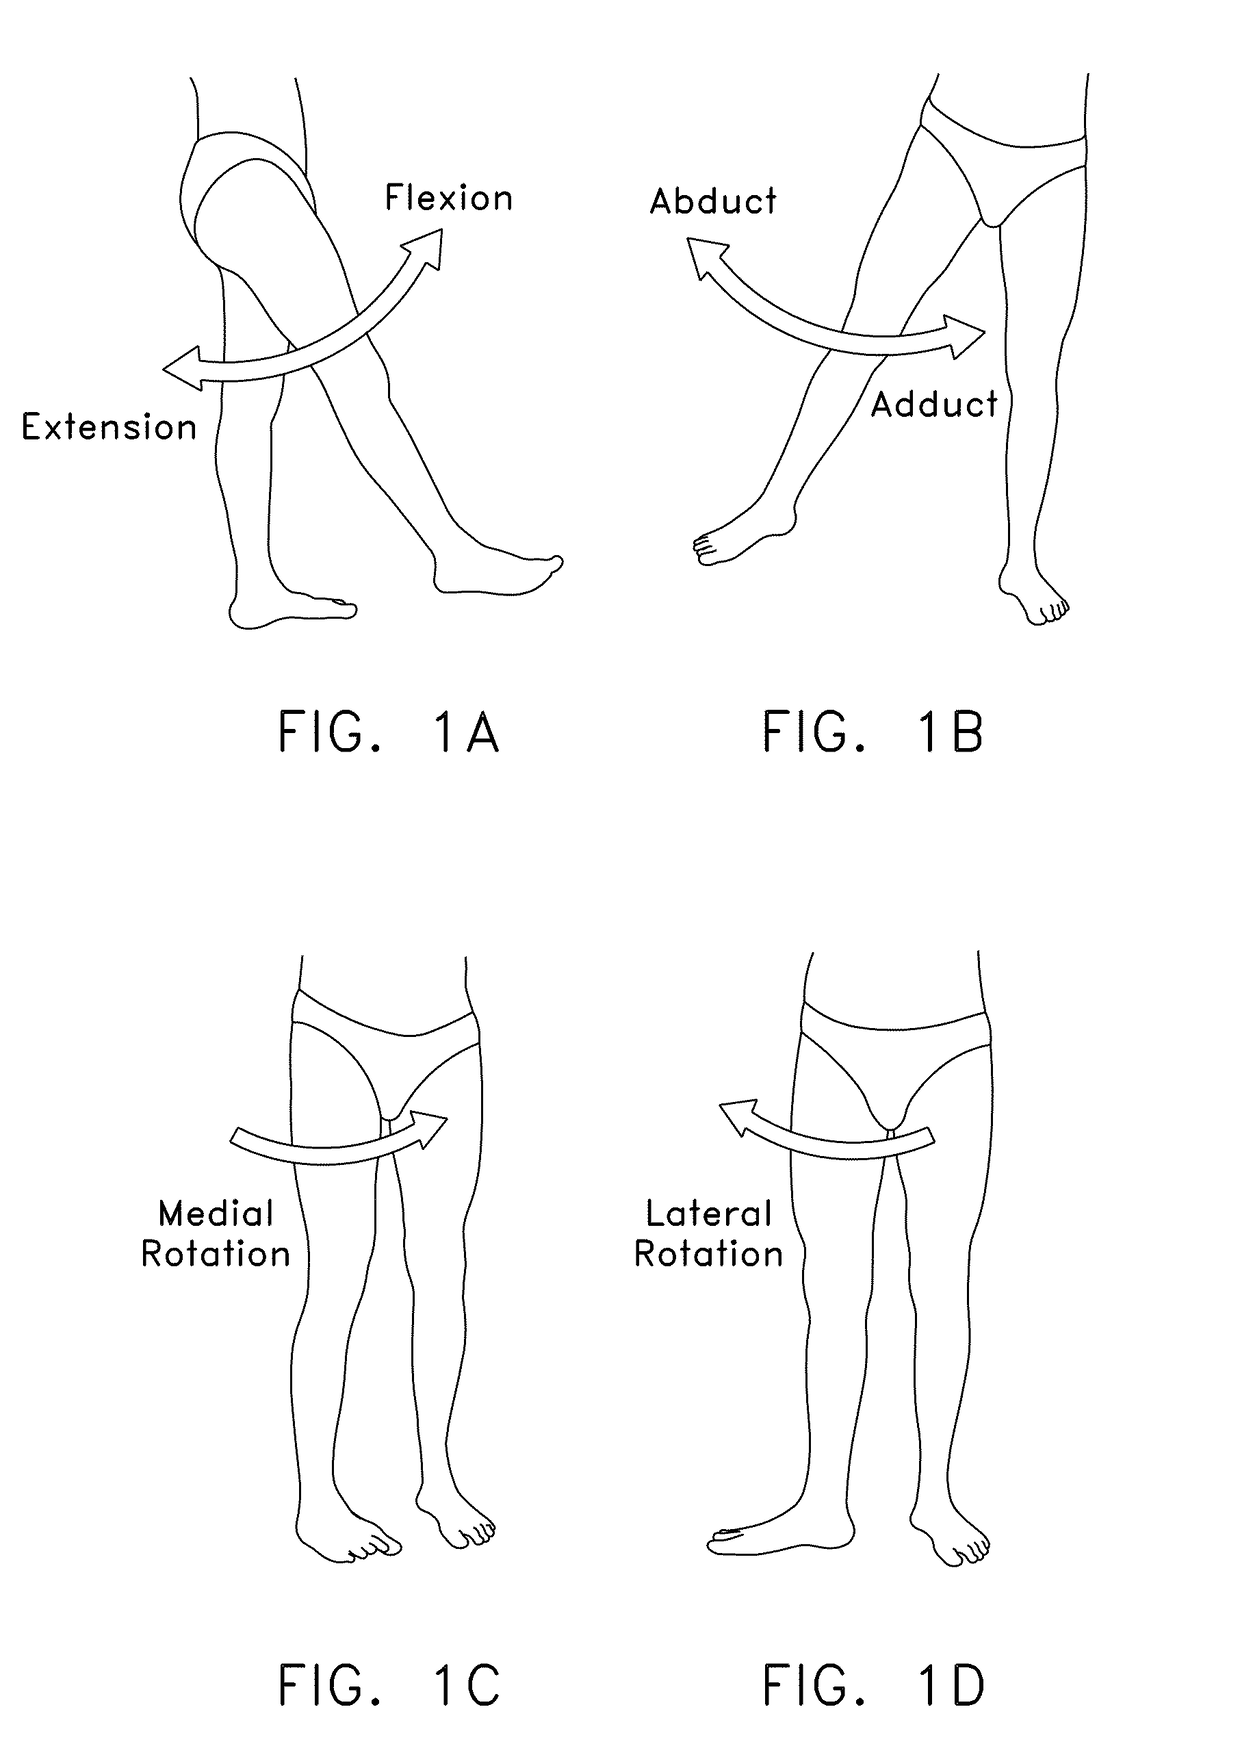 Method and apparatus for treating a hip joint, including the provision and use of a novel suture passer